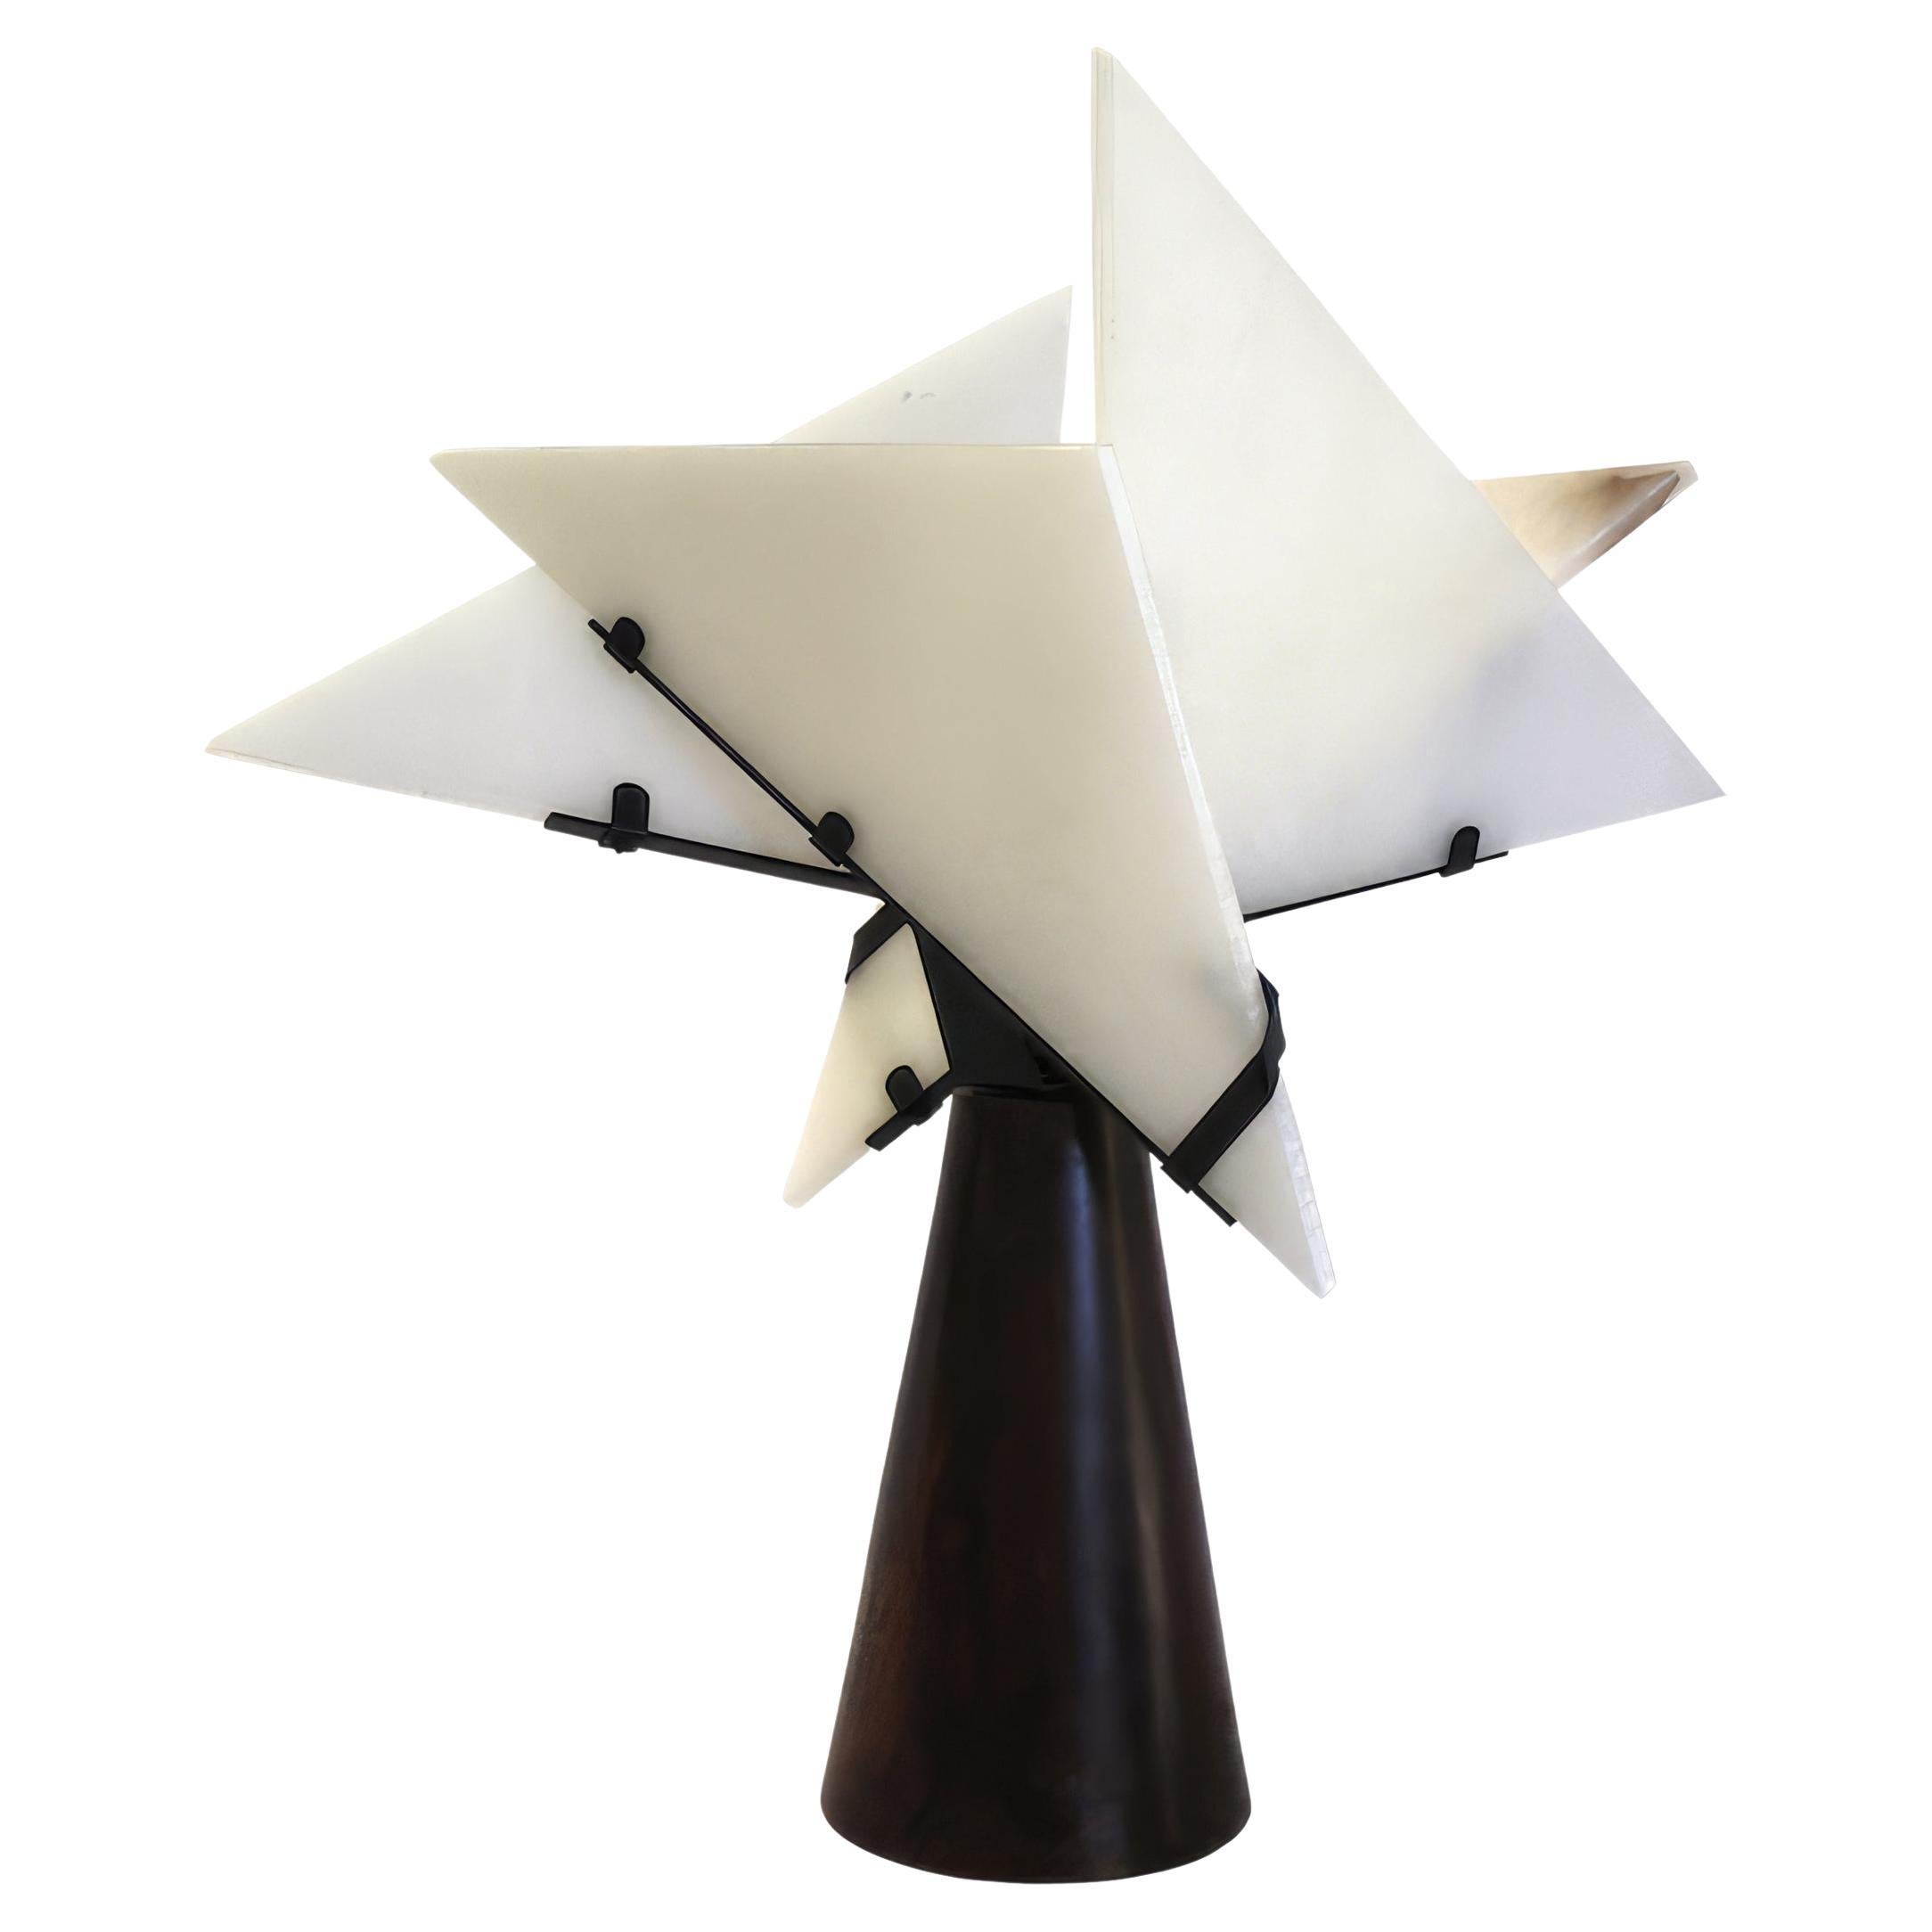 Large 'Nun 2' table lamp in the Manner of Pierre Chareau. Handcrafted in Los Angeles in the workshop of noted French designer and antiques dealer Denis de le Mesiere, who meticulously pays homage to the work of Pierre Chareau with scrupulous